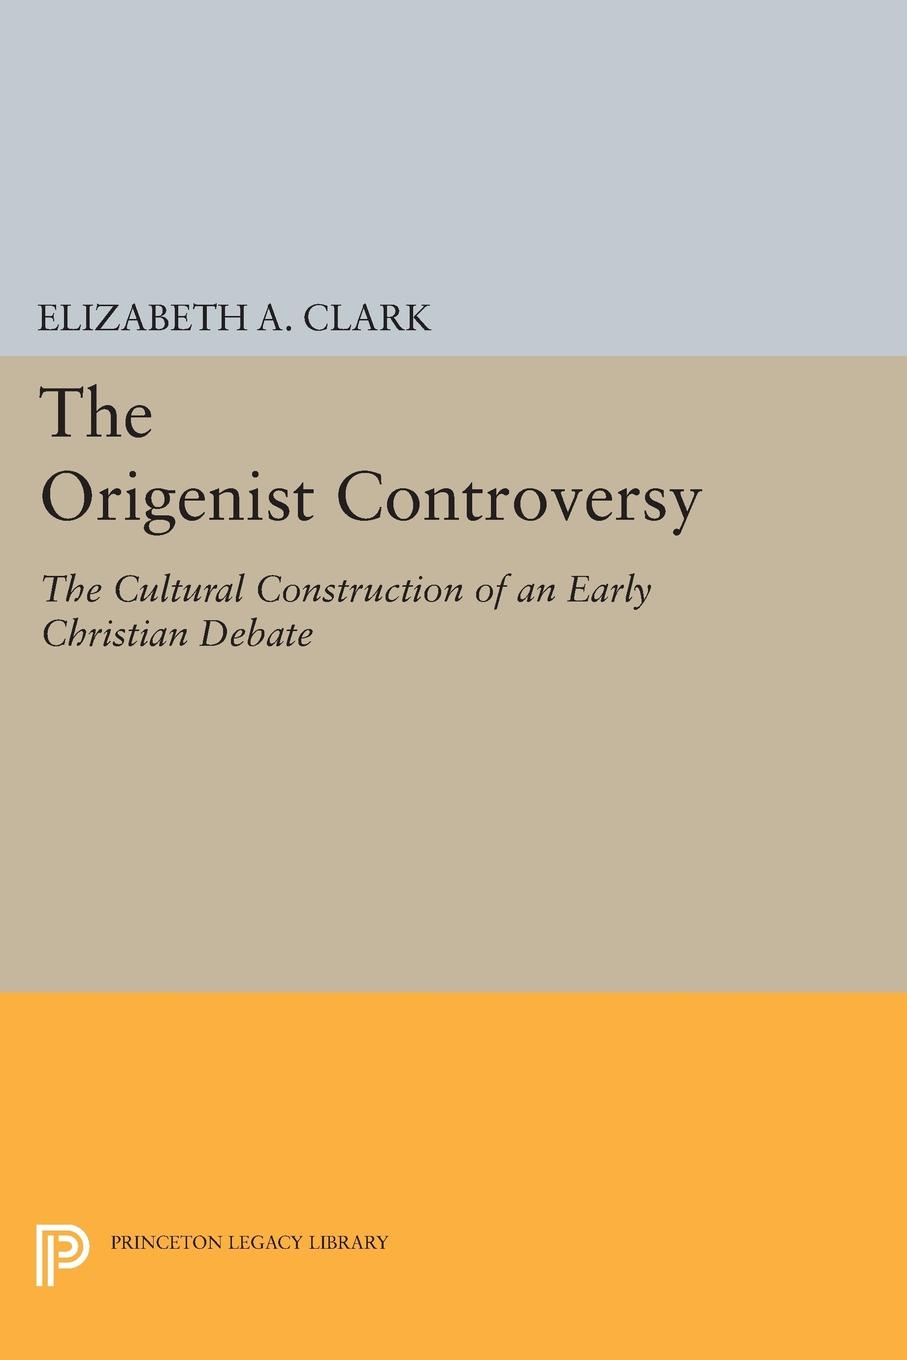 The Origenist Controversy. The Cultural Construction of an Early Christian Debate